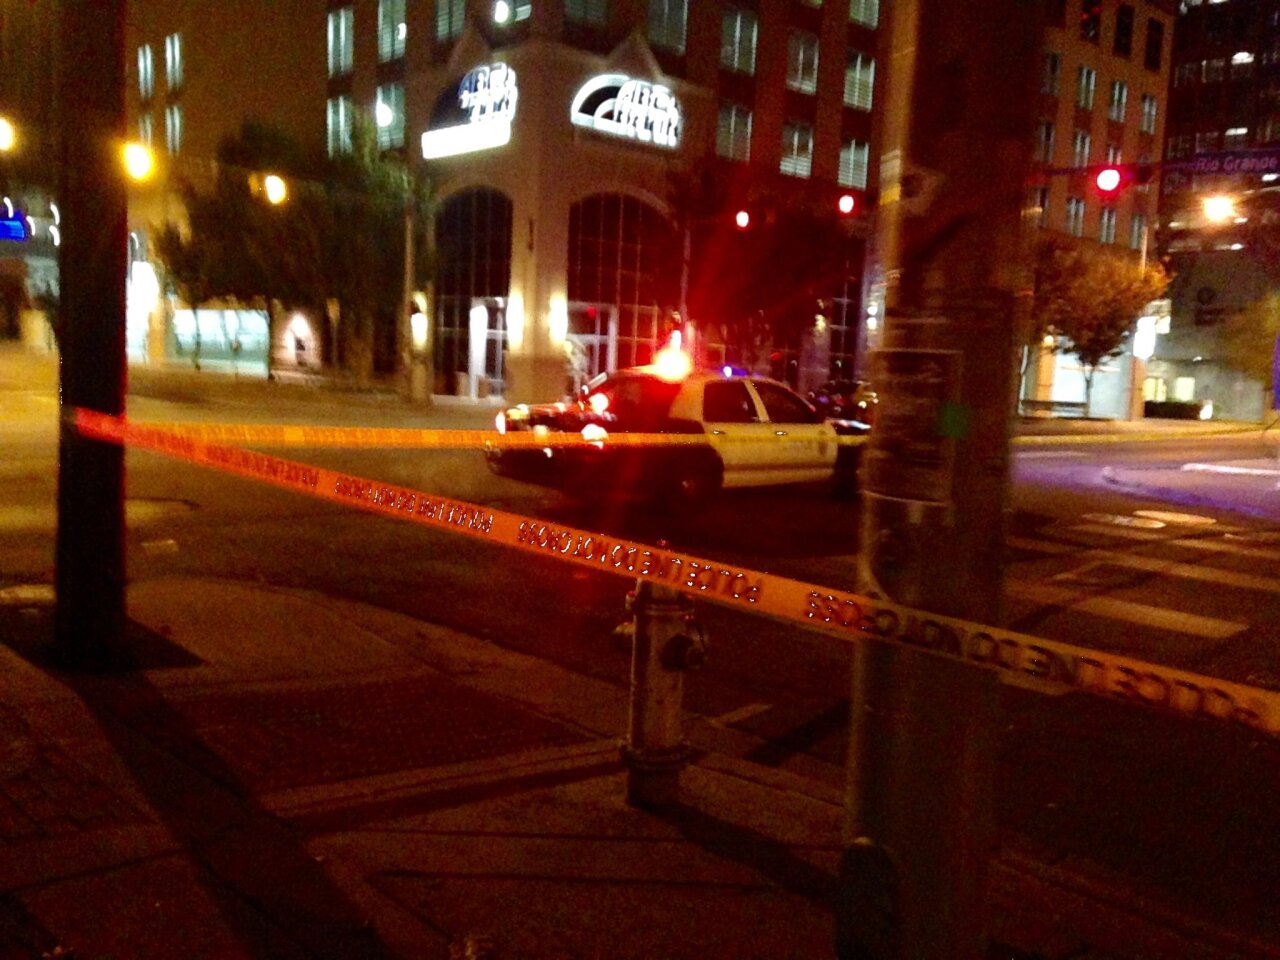 Police tape marks off the scene after authorities shot and killed a man who they say opened fire on the Mexican Consulate, police headquarters and other downtown buildings in downtown Austin, TX.